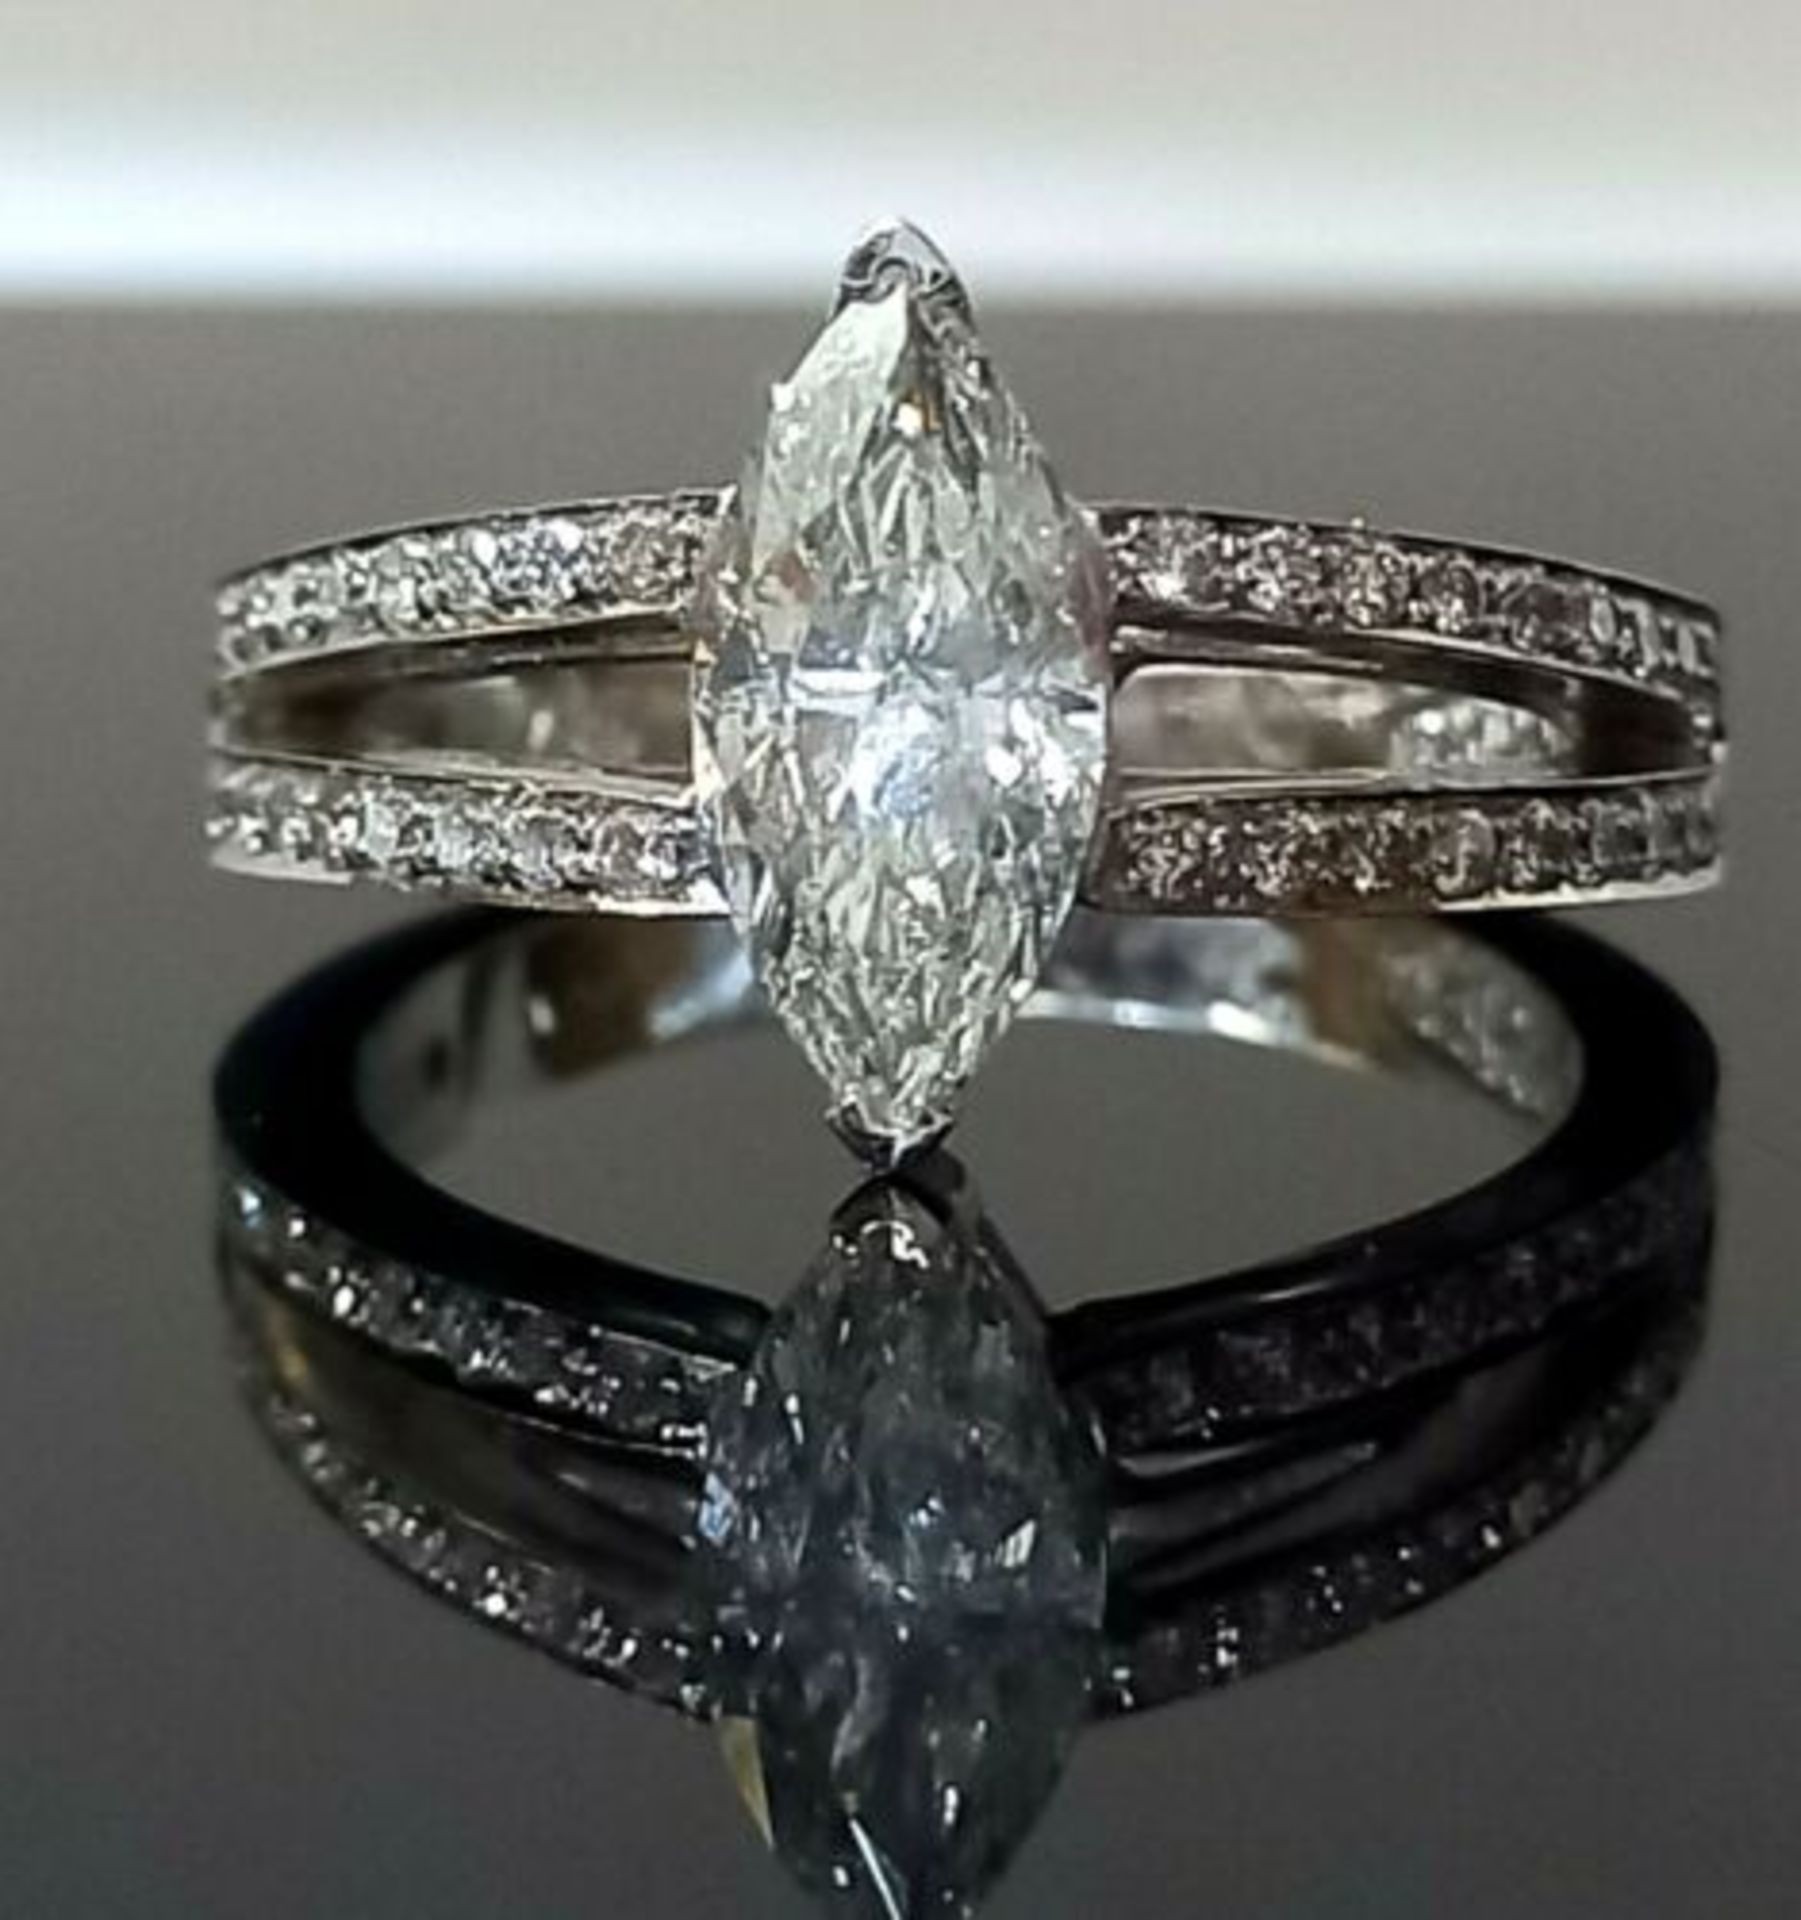 1.41CT MARQUEE DIAMOND ENGAGEMENT RING /DRESS/COCKTAIL + GIFT BOX + VALUATION CERTIFICATE OF £6995